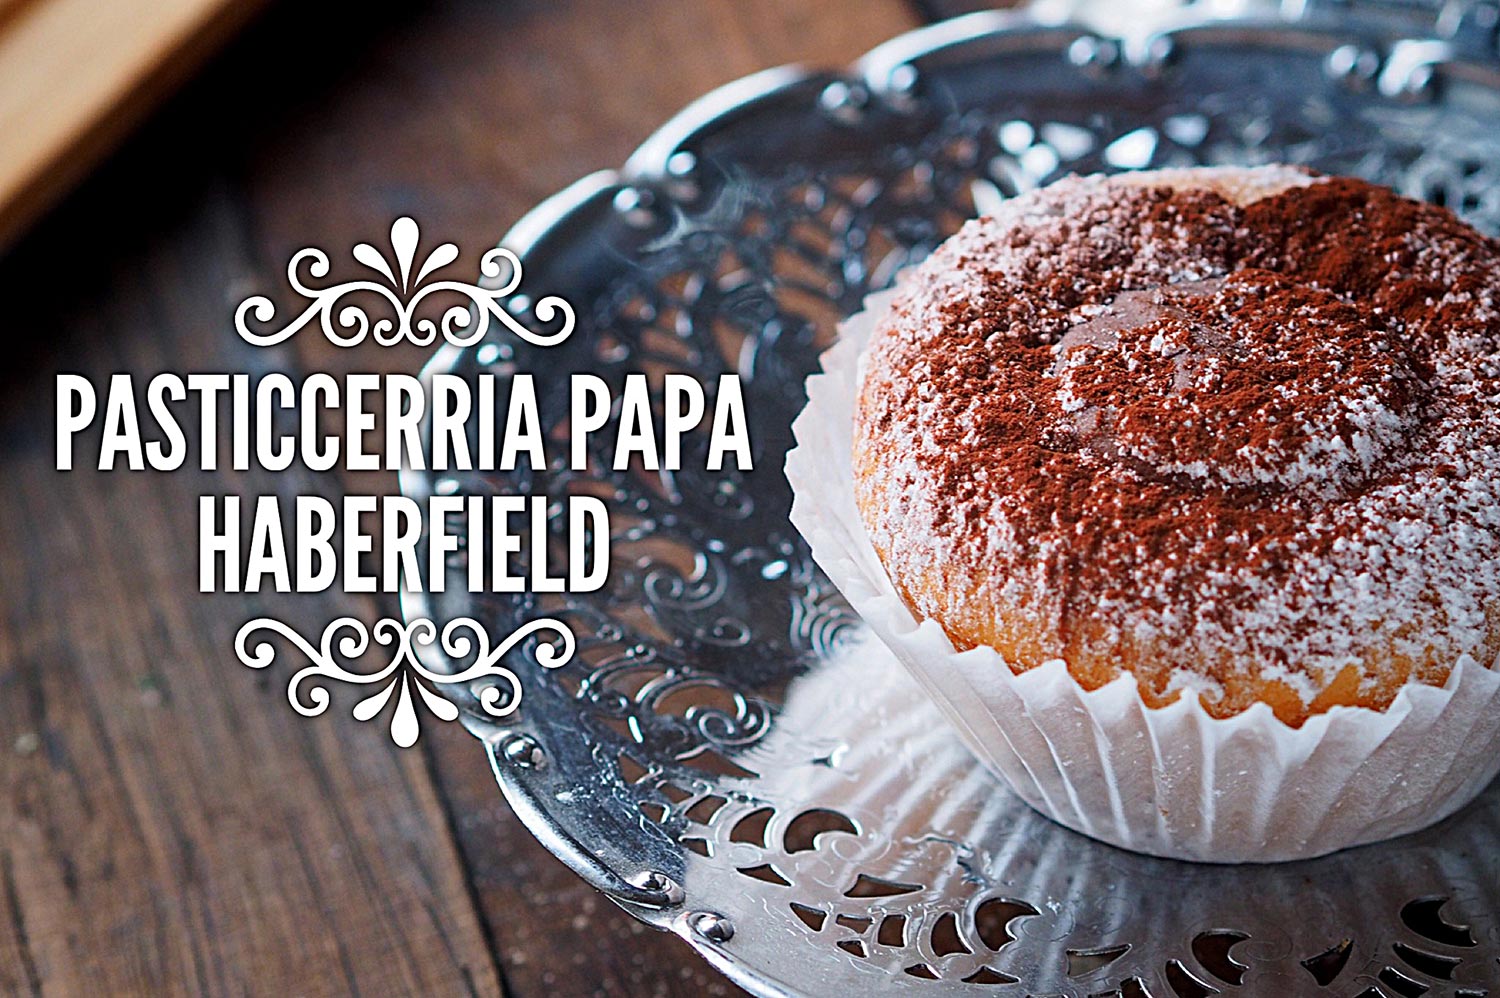 Sydney Food Blog Review of Pasticceria Papa, Haberfield